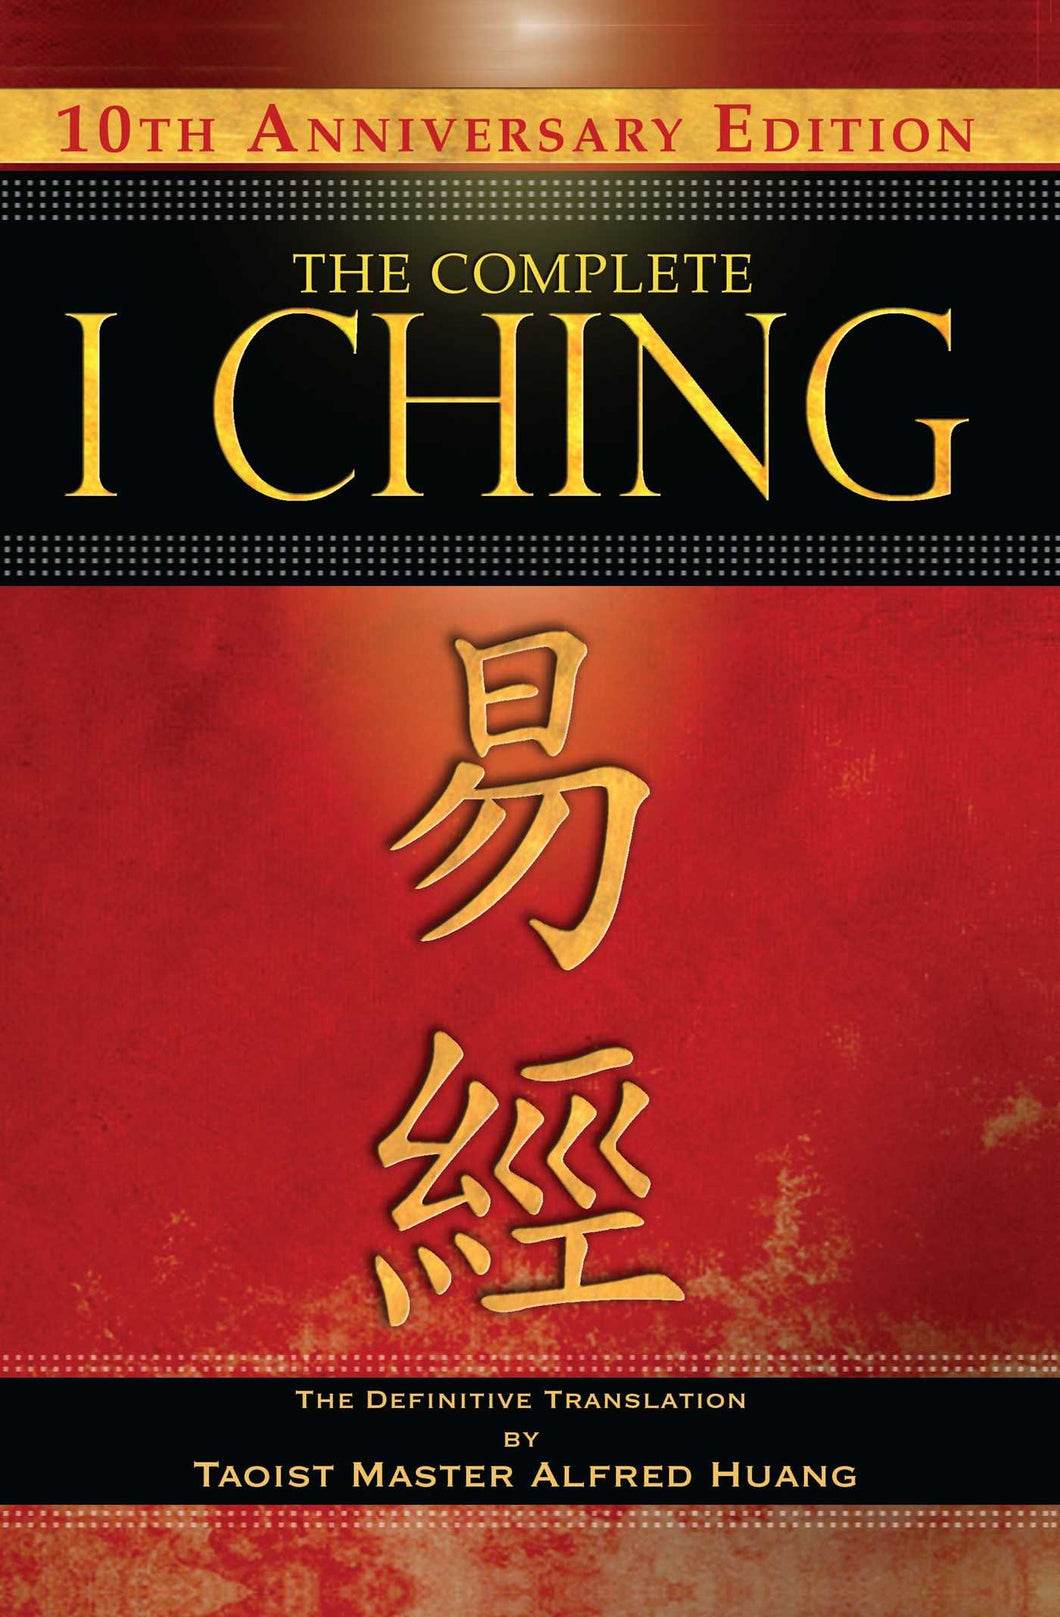 The Complete I Ching: The Definitive Translation by Taoist Master Alfred Huang